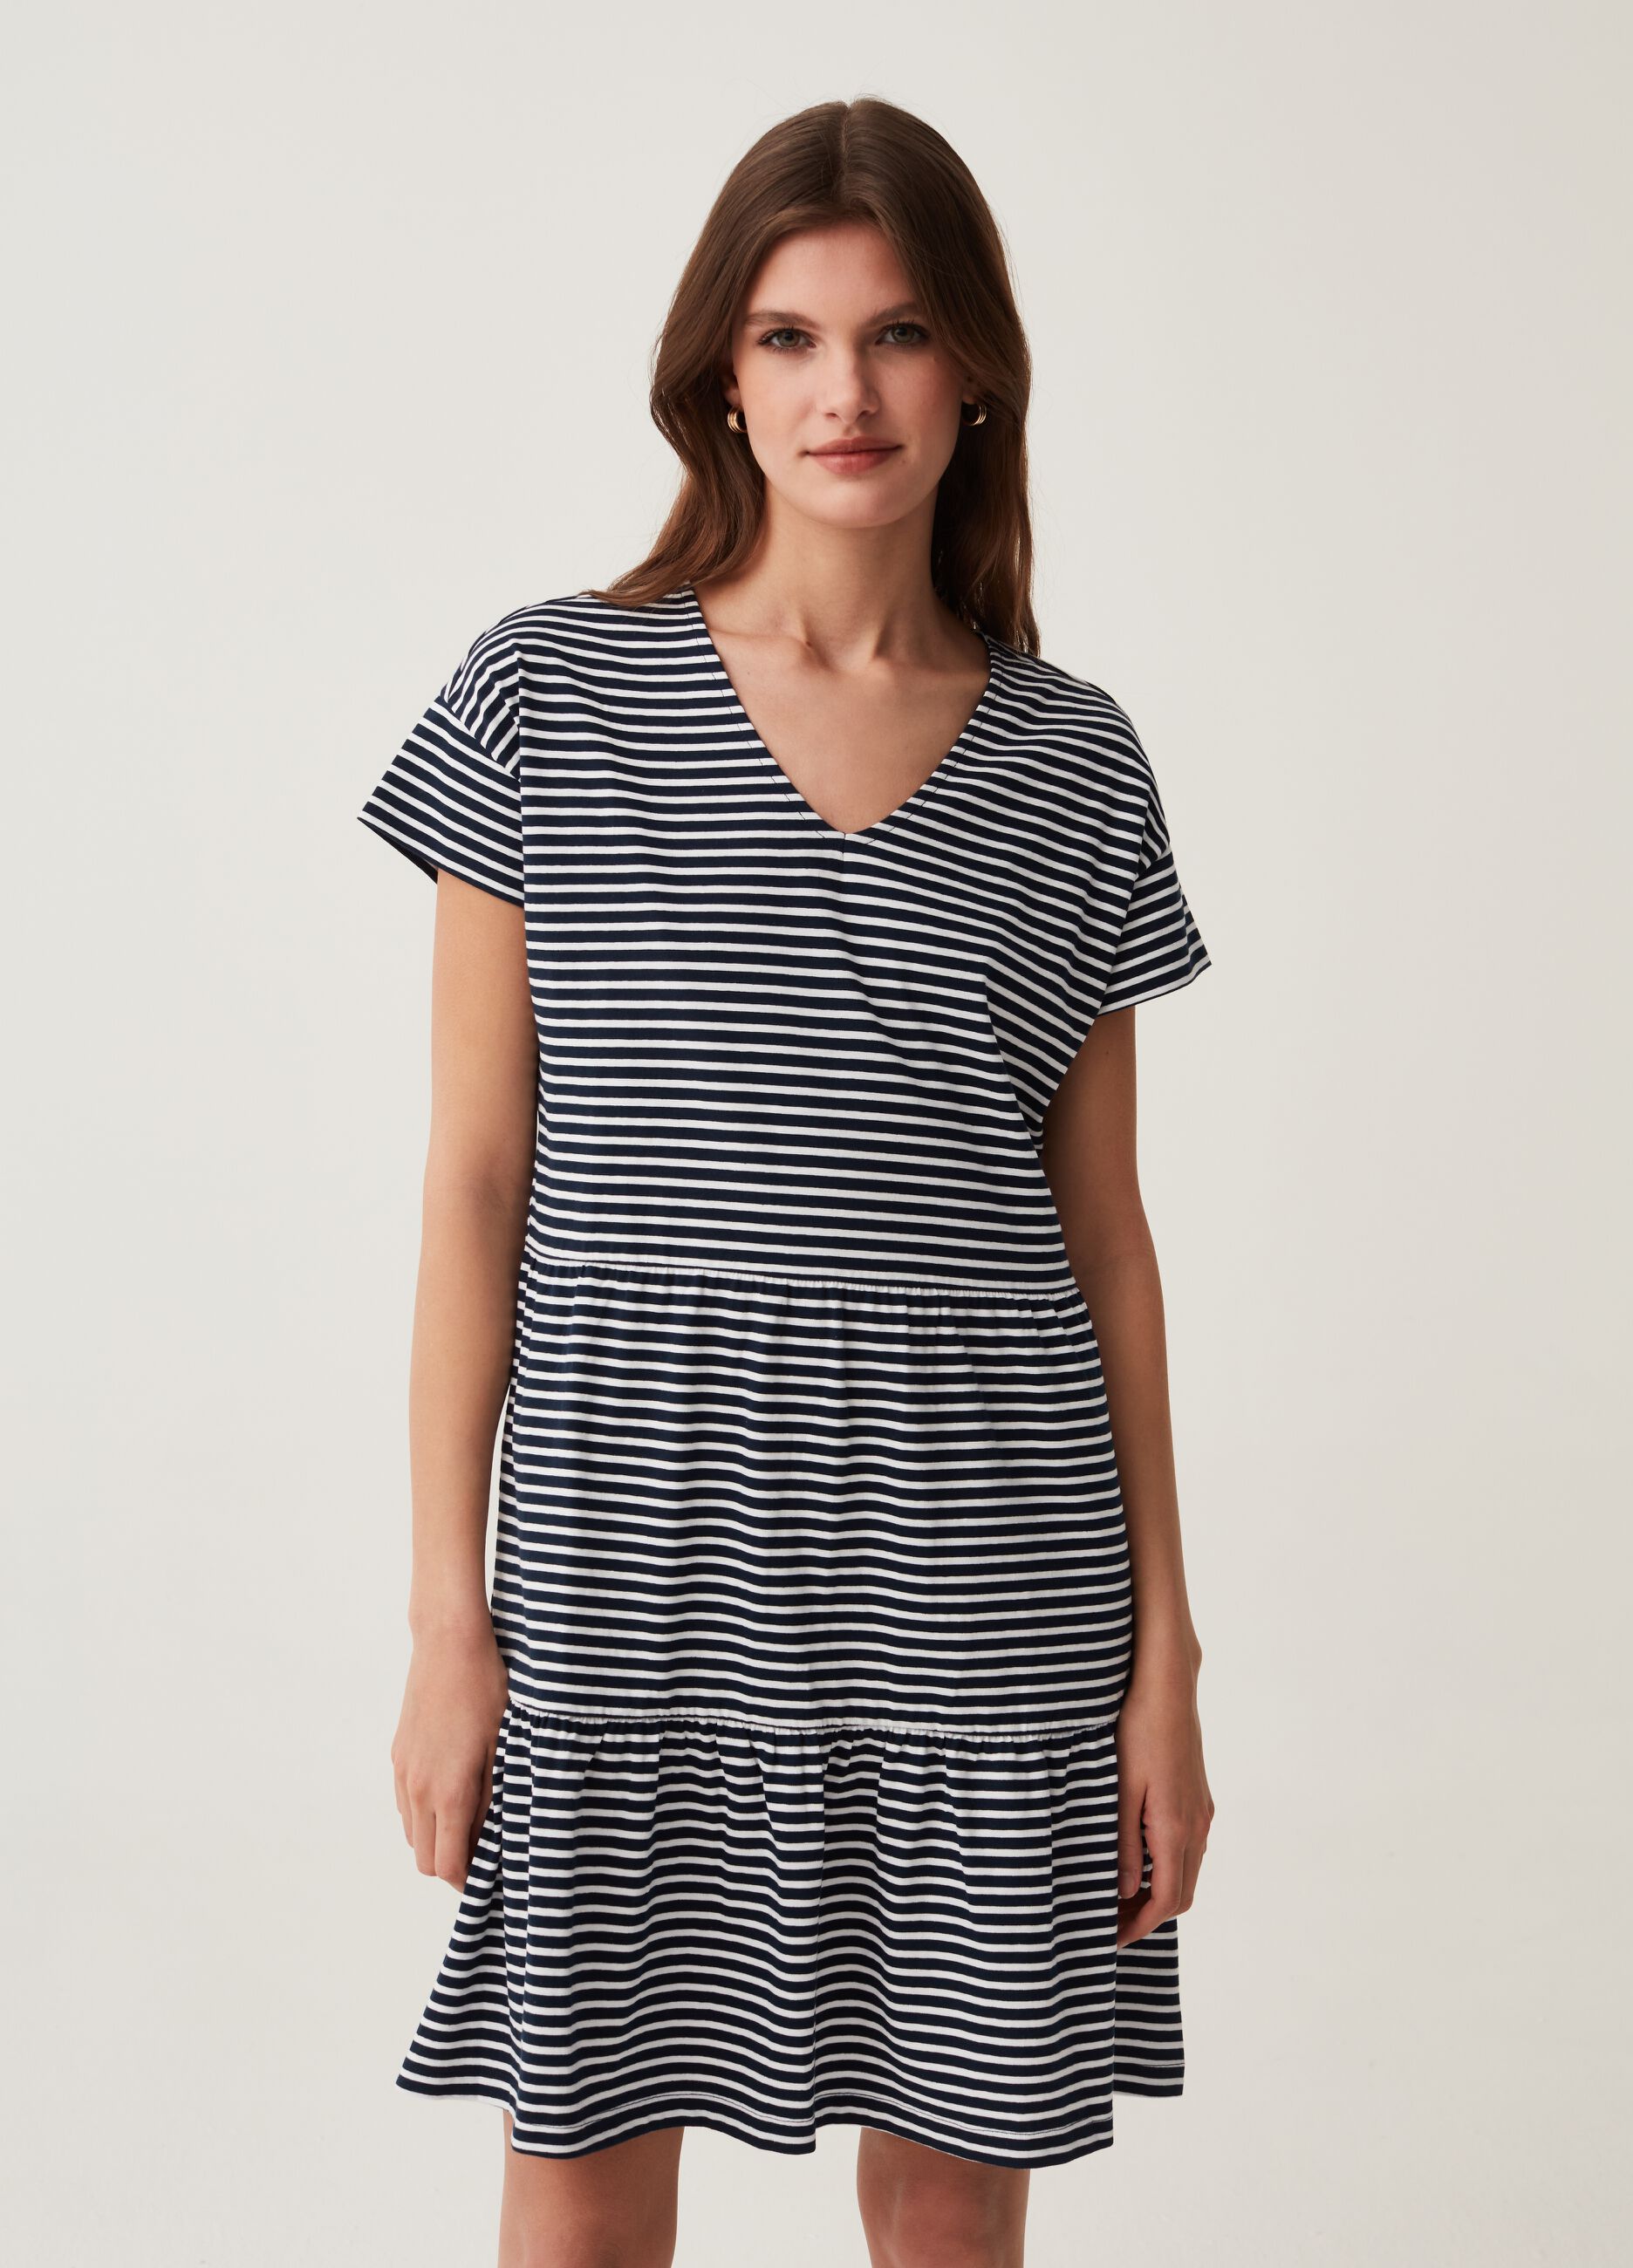 Tiered dress with striped pattern